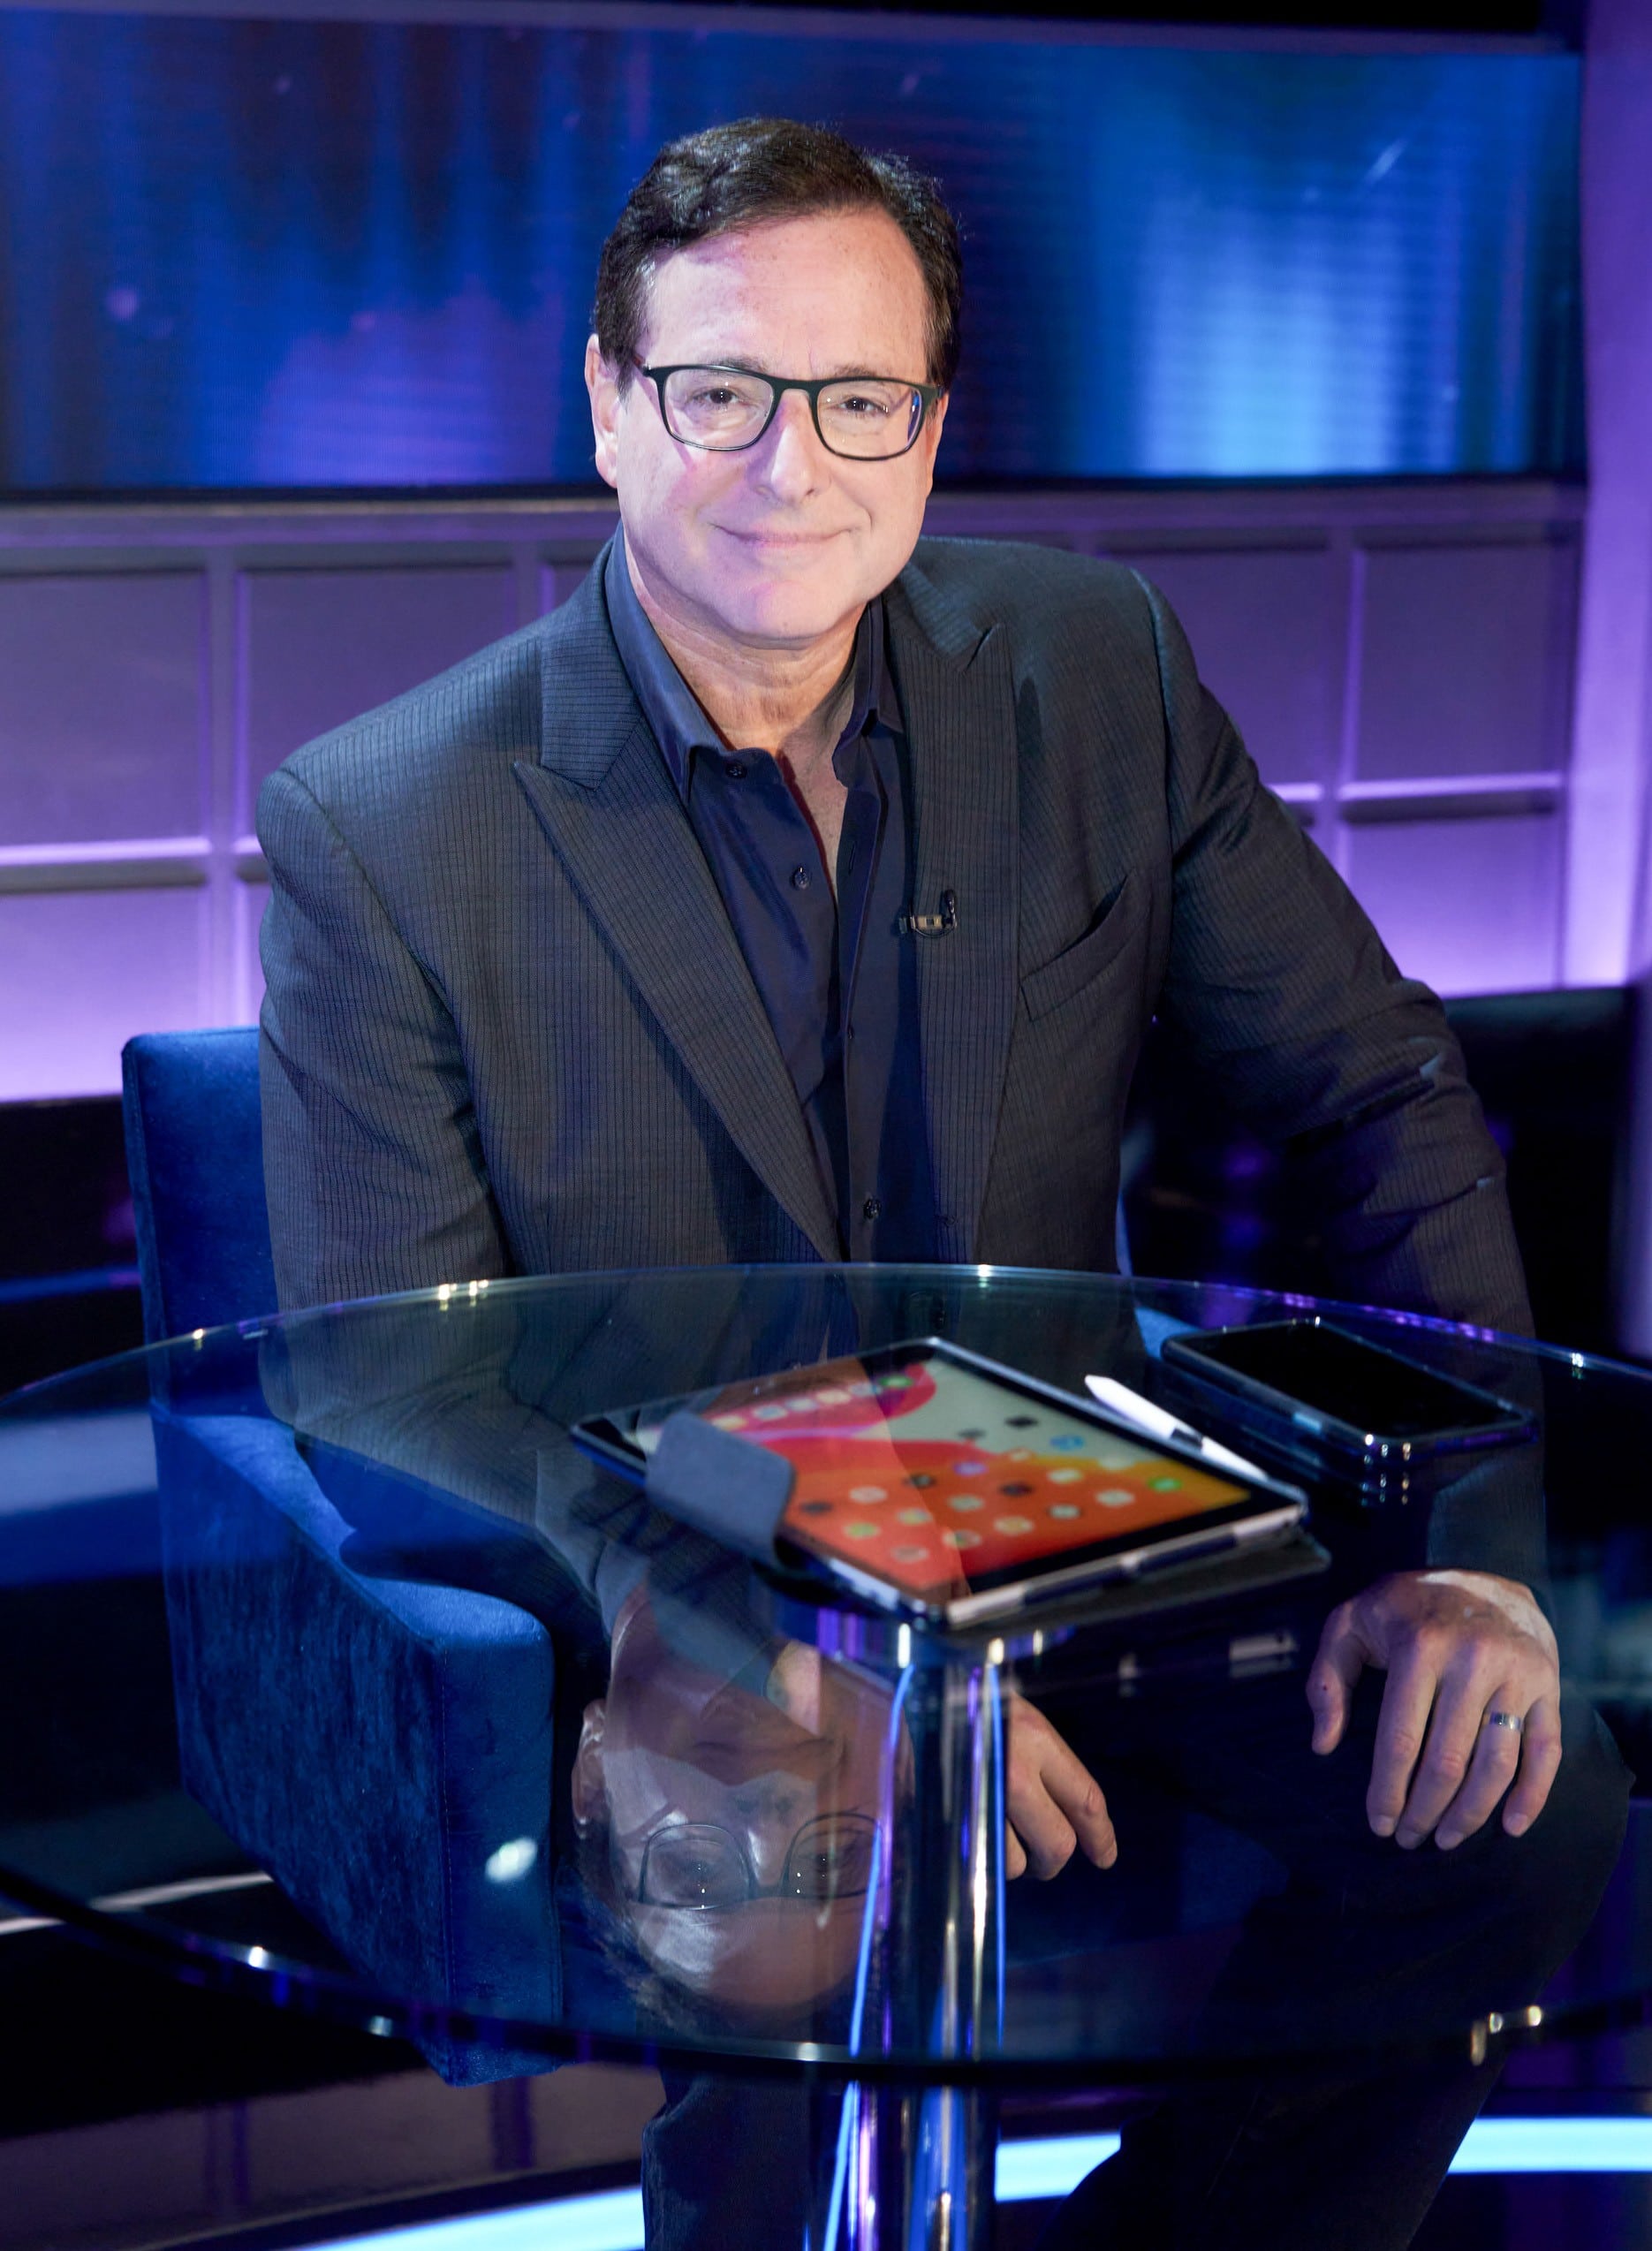 I CAN SEE YOUR VOICE, panelist Bob Saget